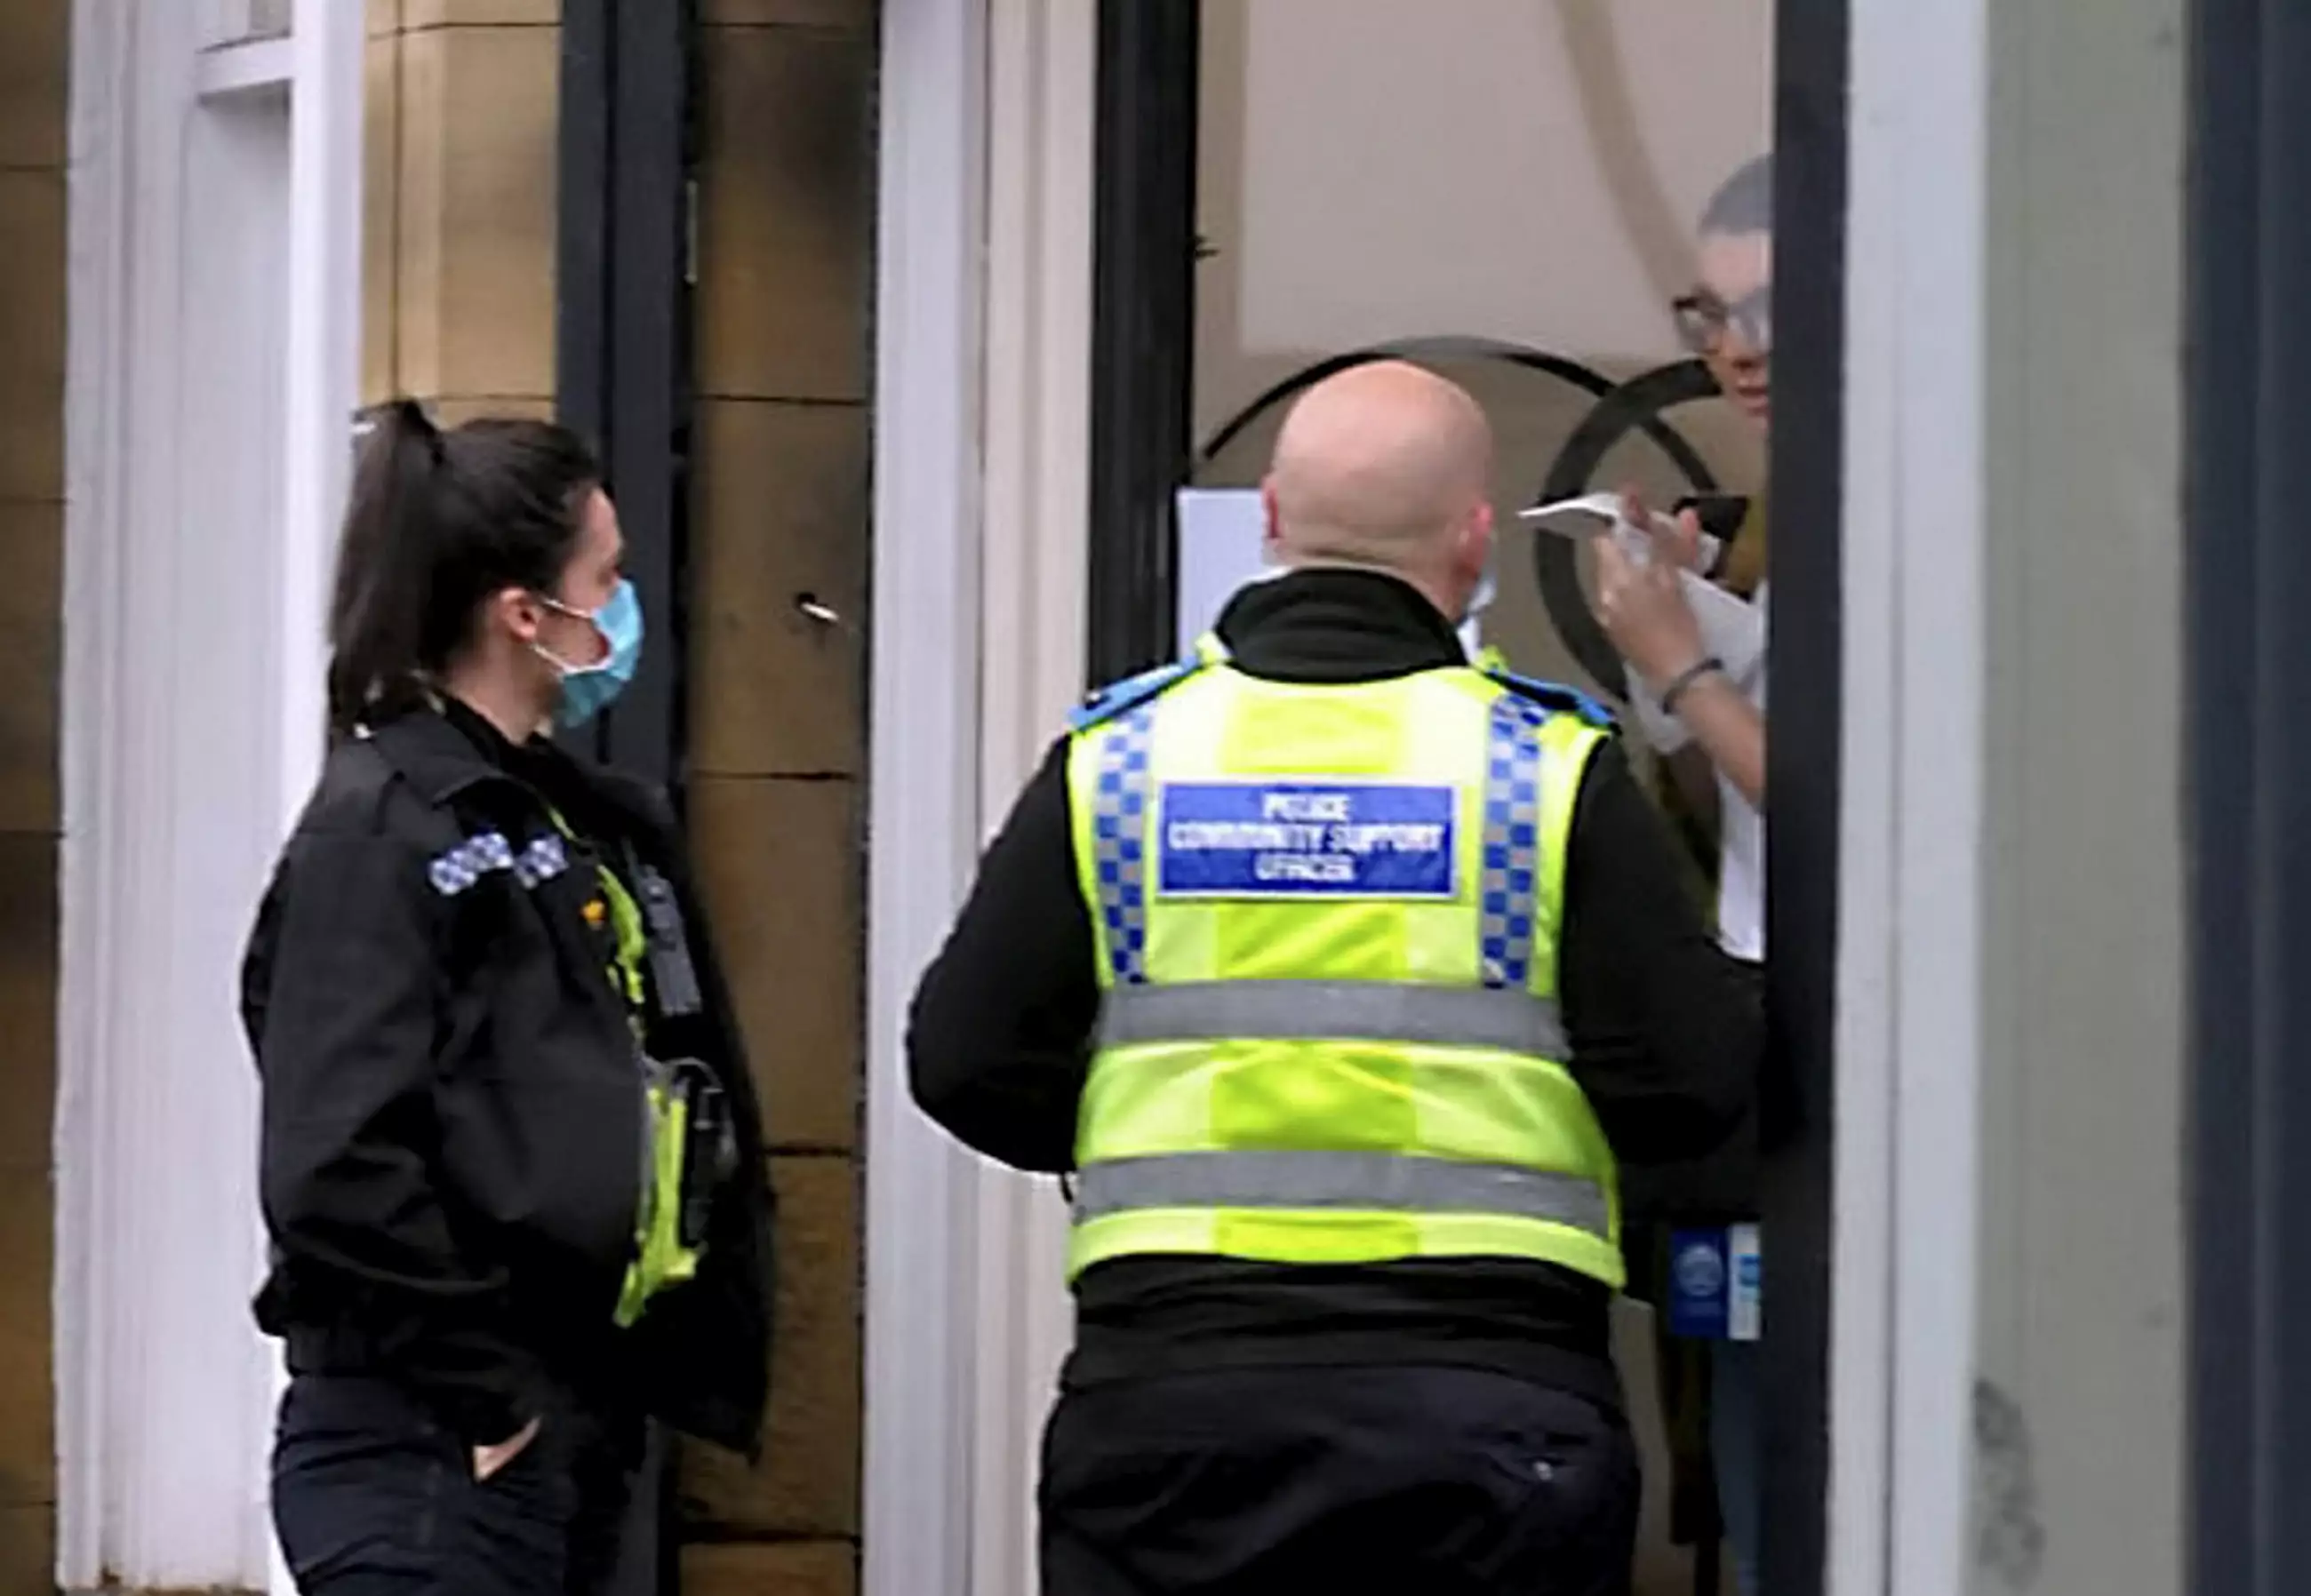 A salon owner was recently fined for flouting the lockdown rules in England.